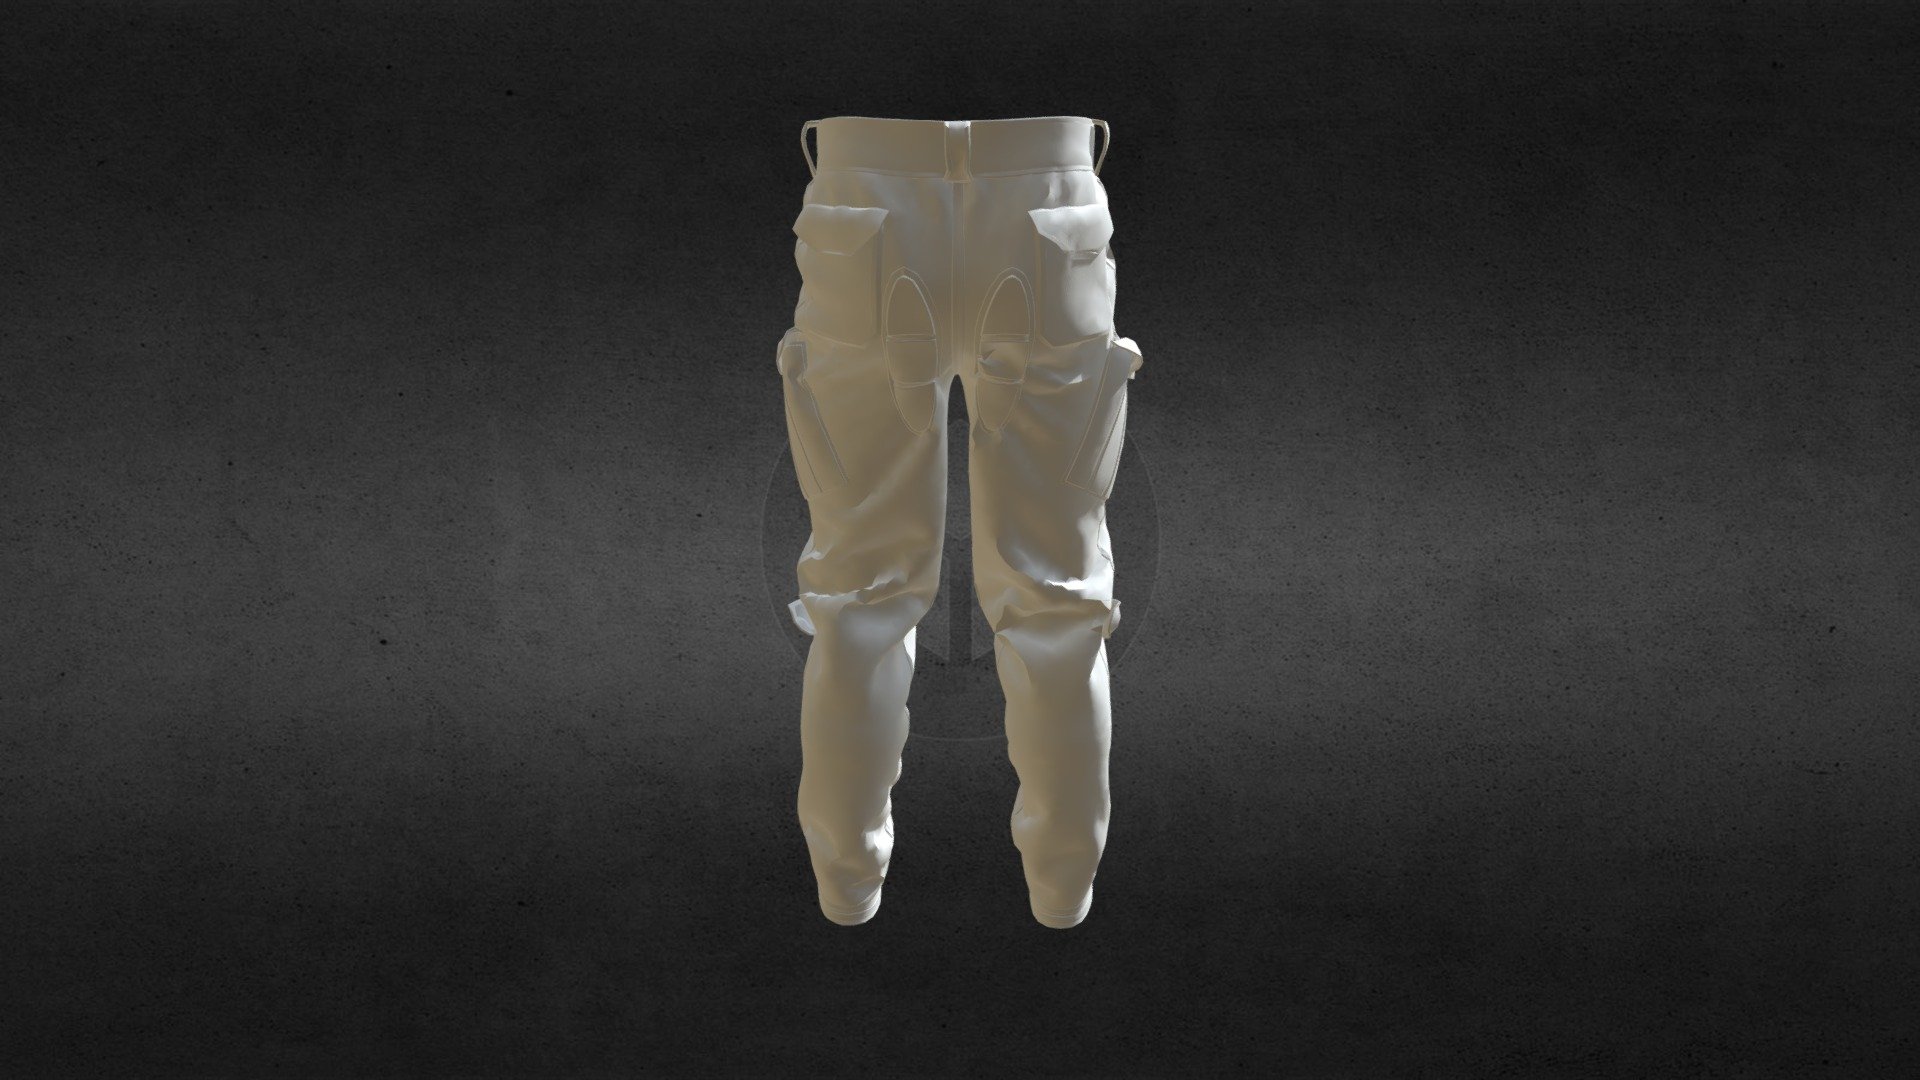 Military tactital 3D pants with pockets. UVs &amp; 4k. Pockets and details are part of model, not texture.
Made in Marvelous Desinger for Unreal Engine Metahuman - Military tactical pants - 3D model by puliaev.p 3d model